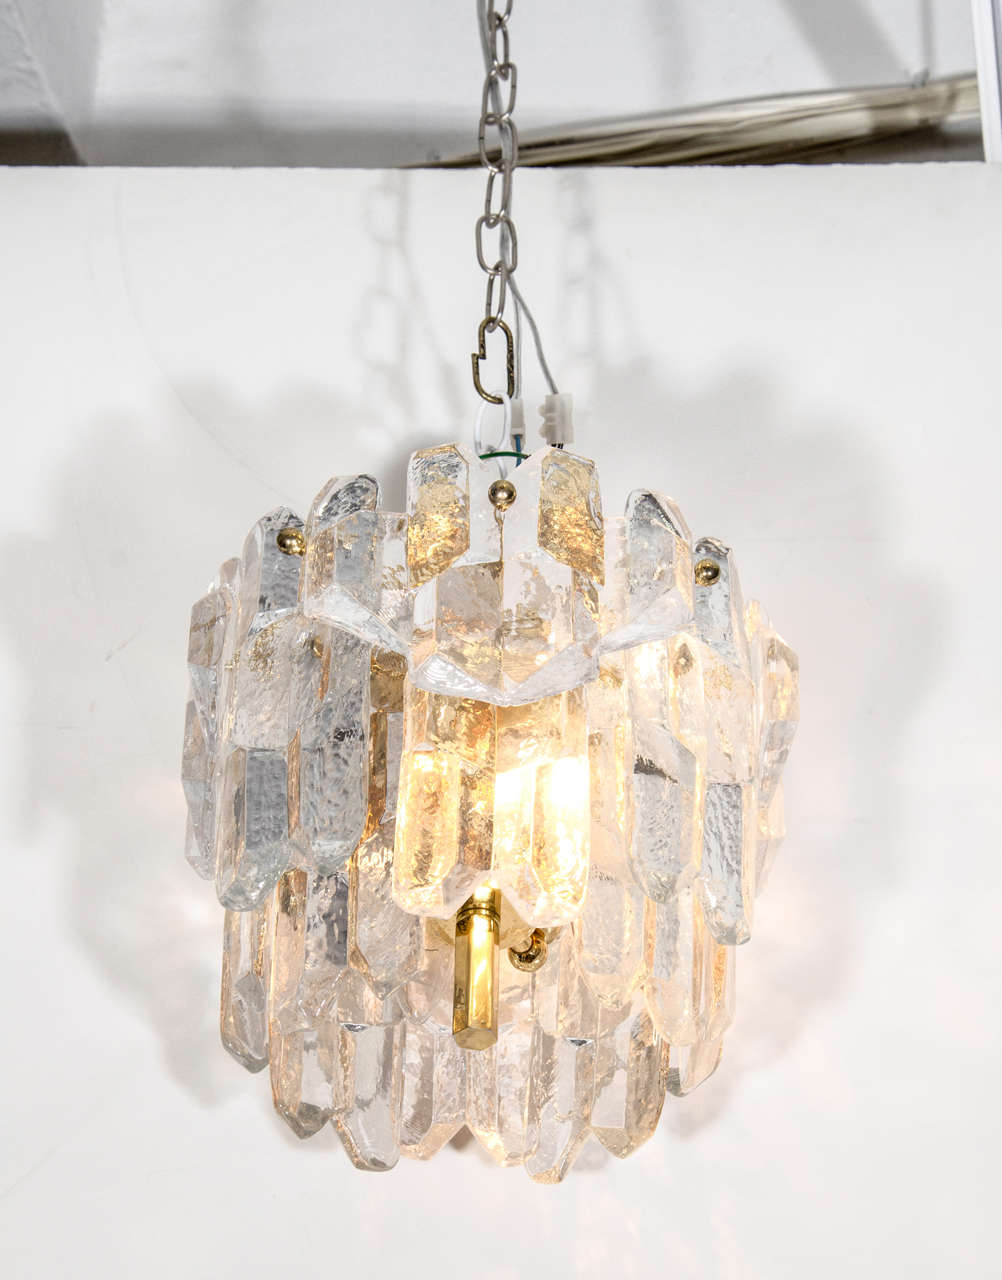 A vintage Austrian crystal chandelier with prisms suspended from a brass body by Kalmar.